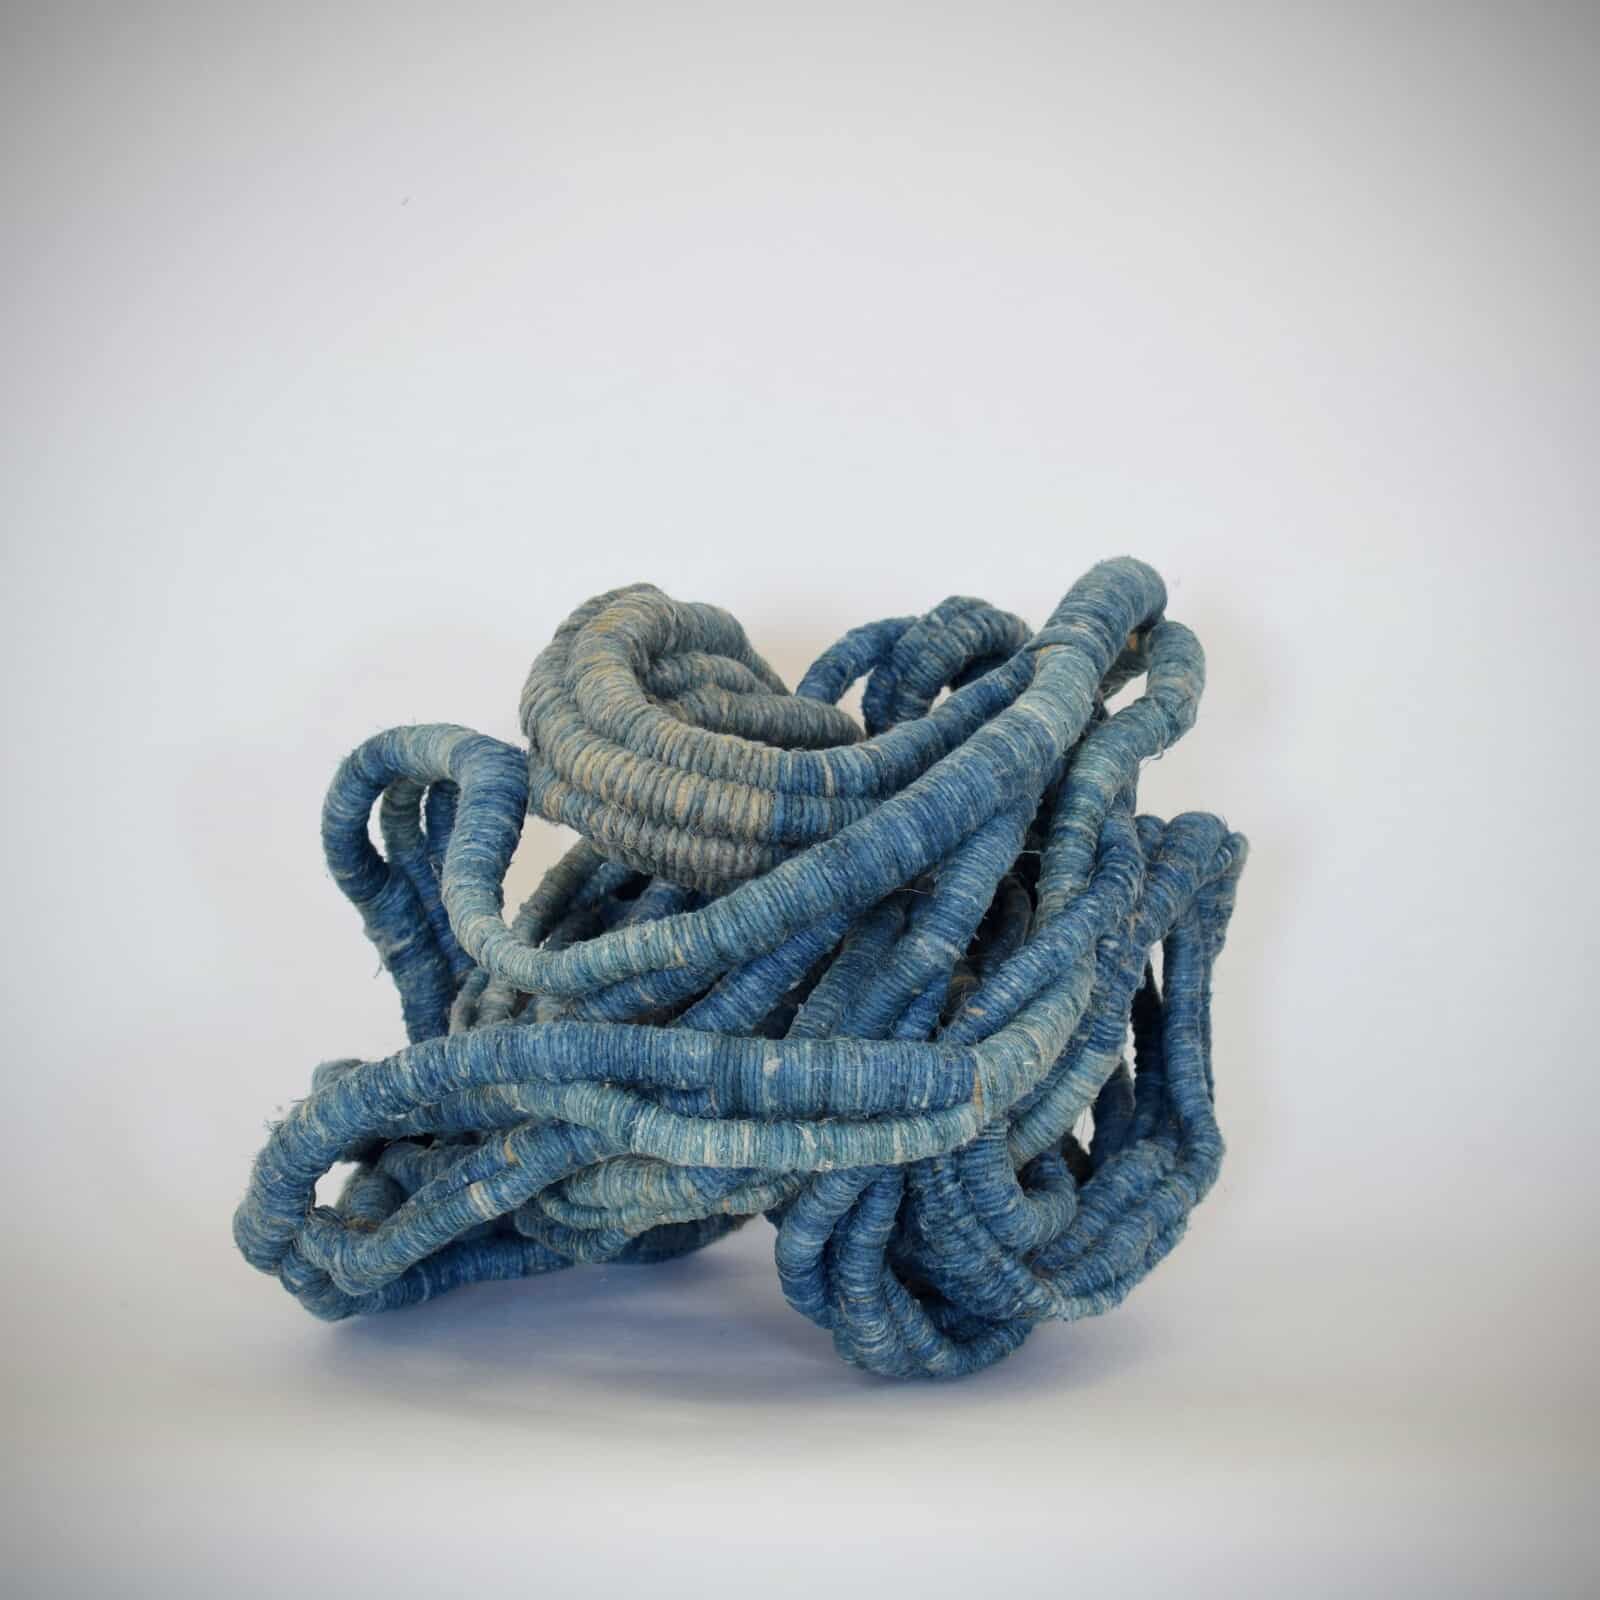 sculpture made of linen dyed natural indigo pigments by Aude Franjou